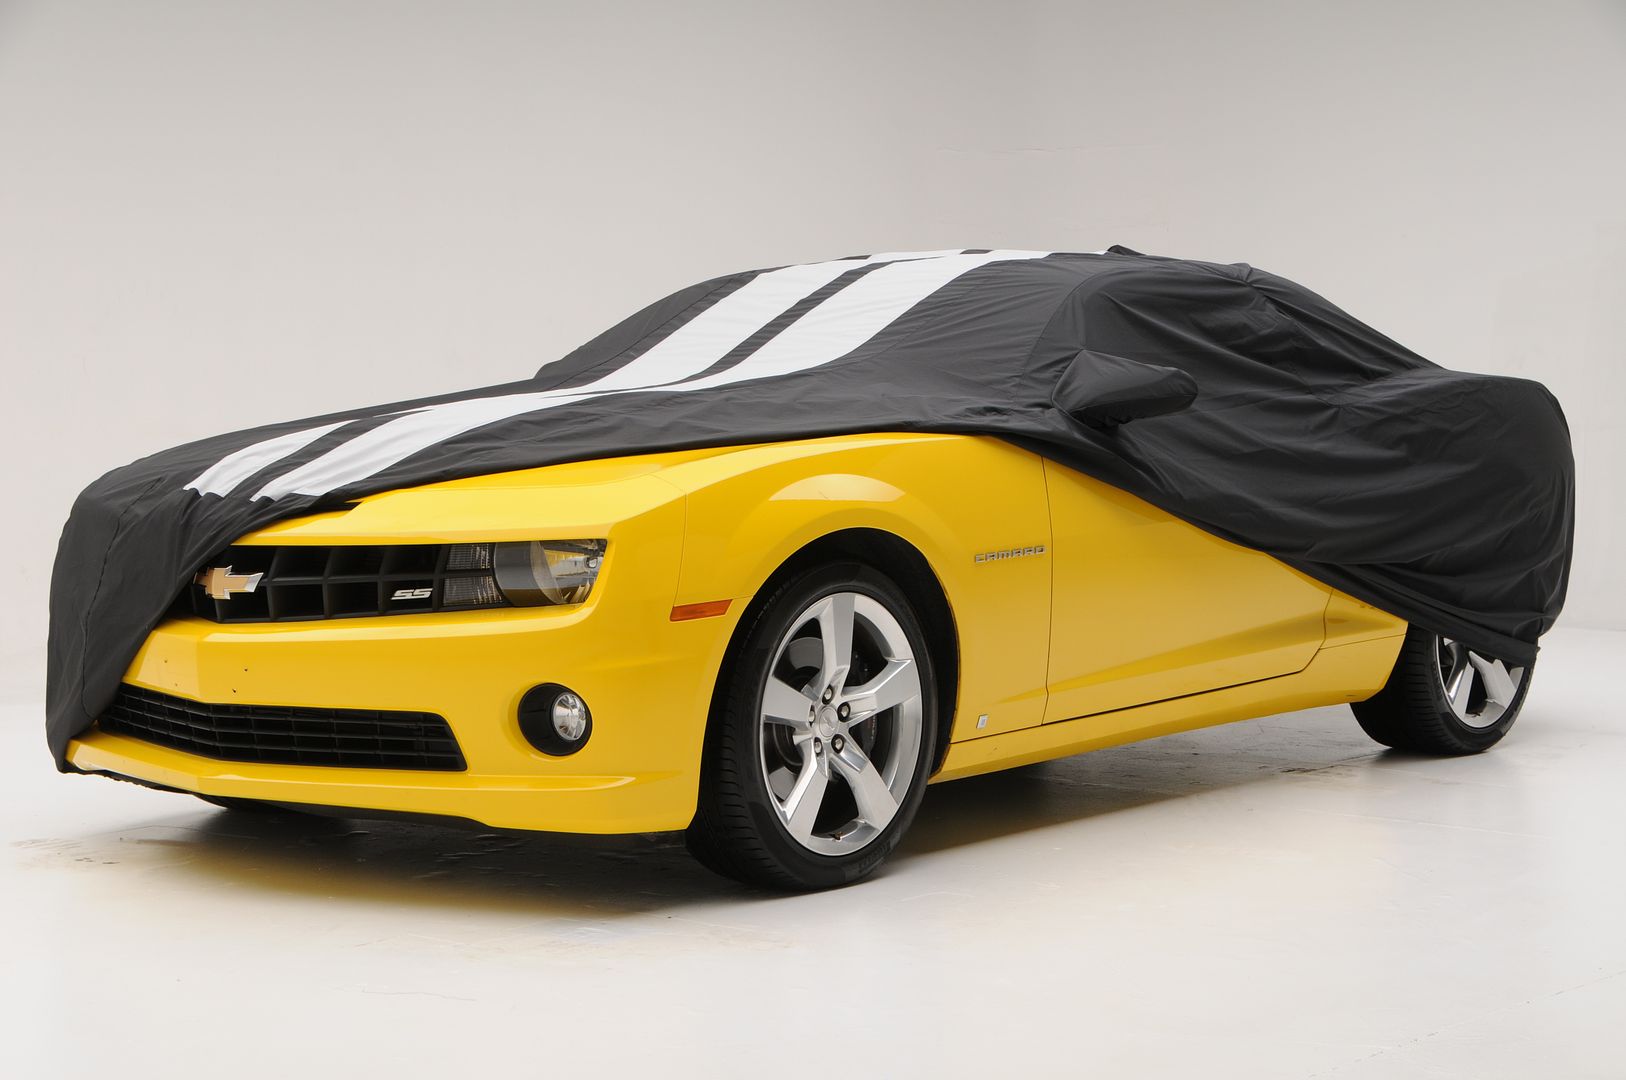 Camaro CoverKing Satin Stretch Indoor Cover (variety of styles) fits all 2010, 2011, 2012